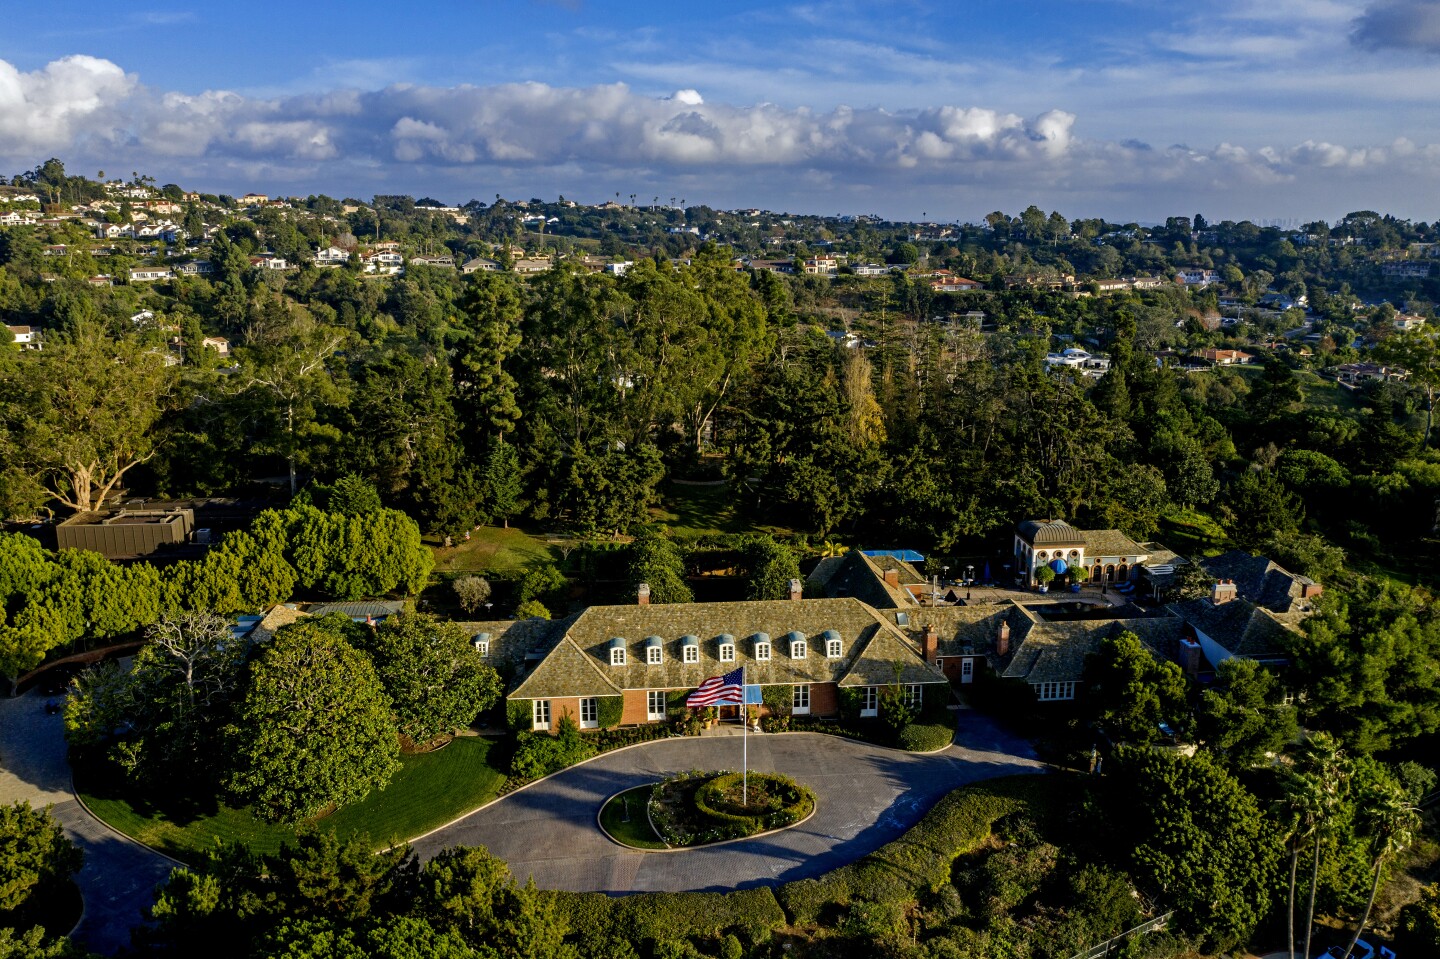 Foxhill estate, a La Jolla property that formerly belonged to the late David Copley, was sold to hotel developer Doug Manchester for $17 million in 2015. The French manor-style home, designed by Roy Drew, is back on the market for $25 million.